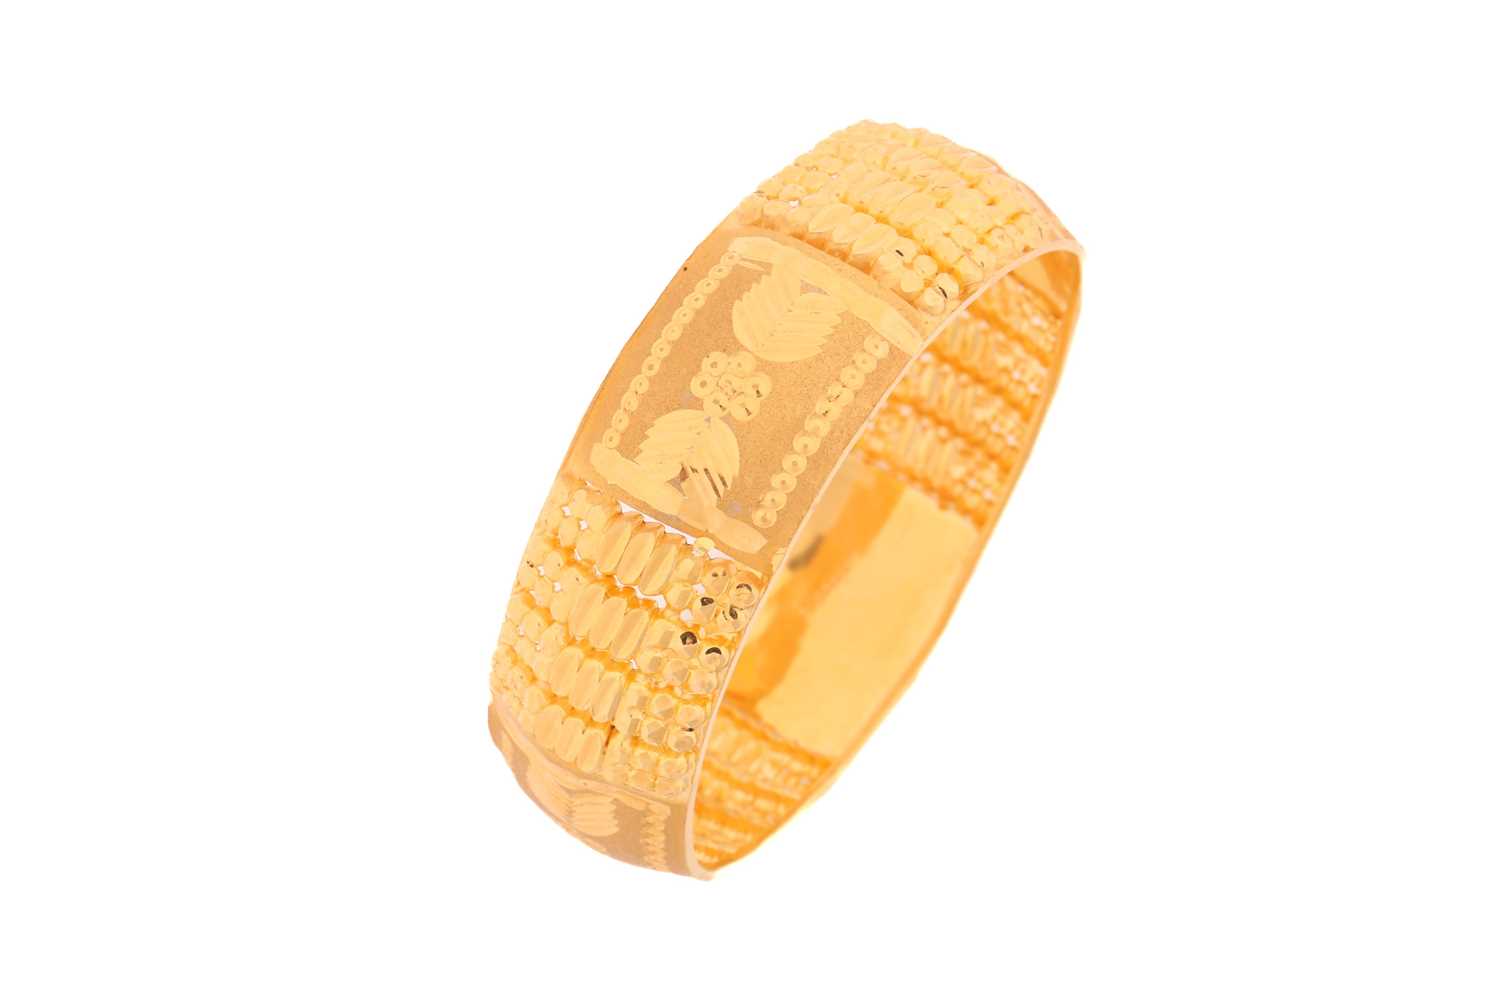 A yellow metal bangle, decorated with pierced, engraved and burred patterns, as well as sandblast